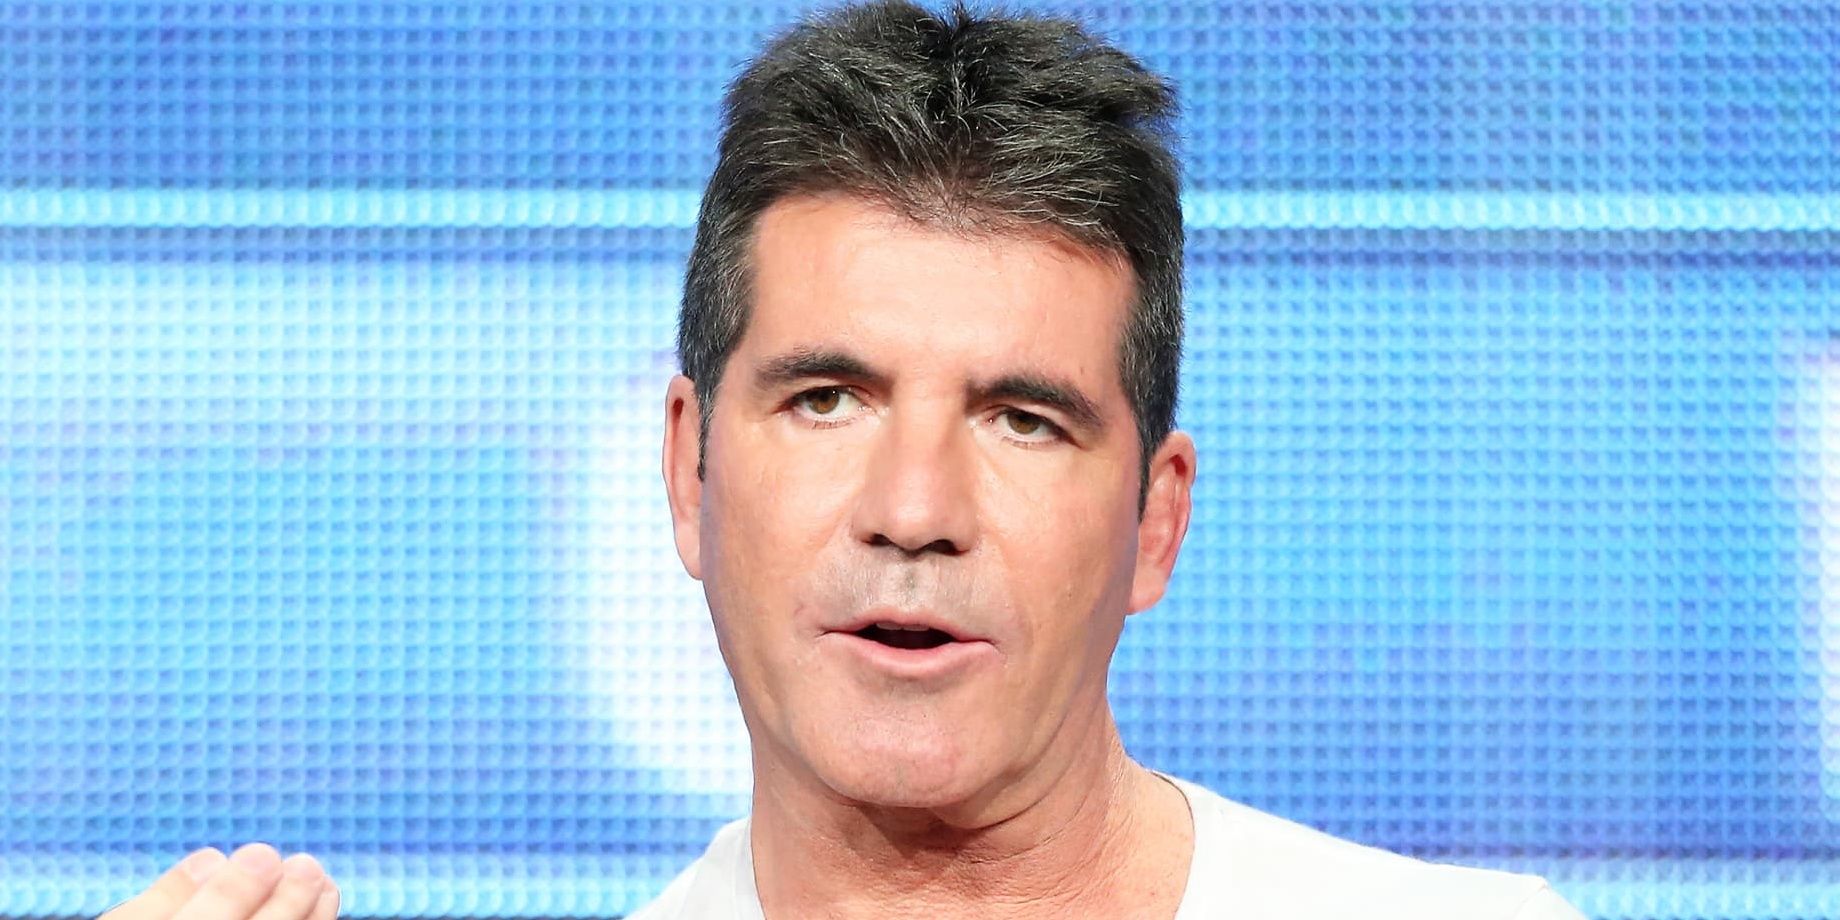 Simon Cowell to Lead New UK Musical Reality Show Titled Walk The Line